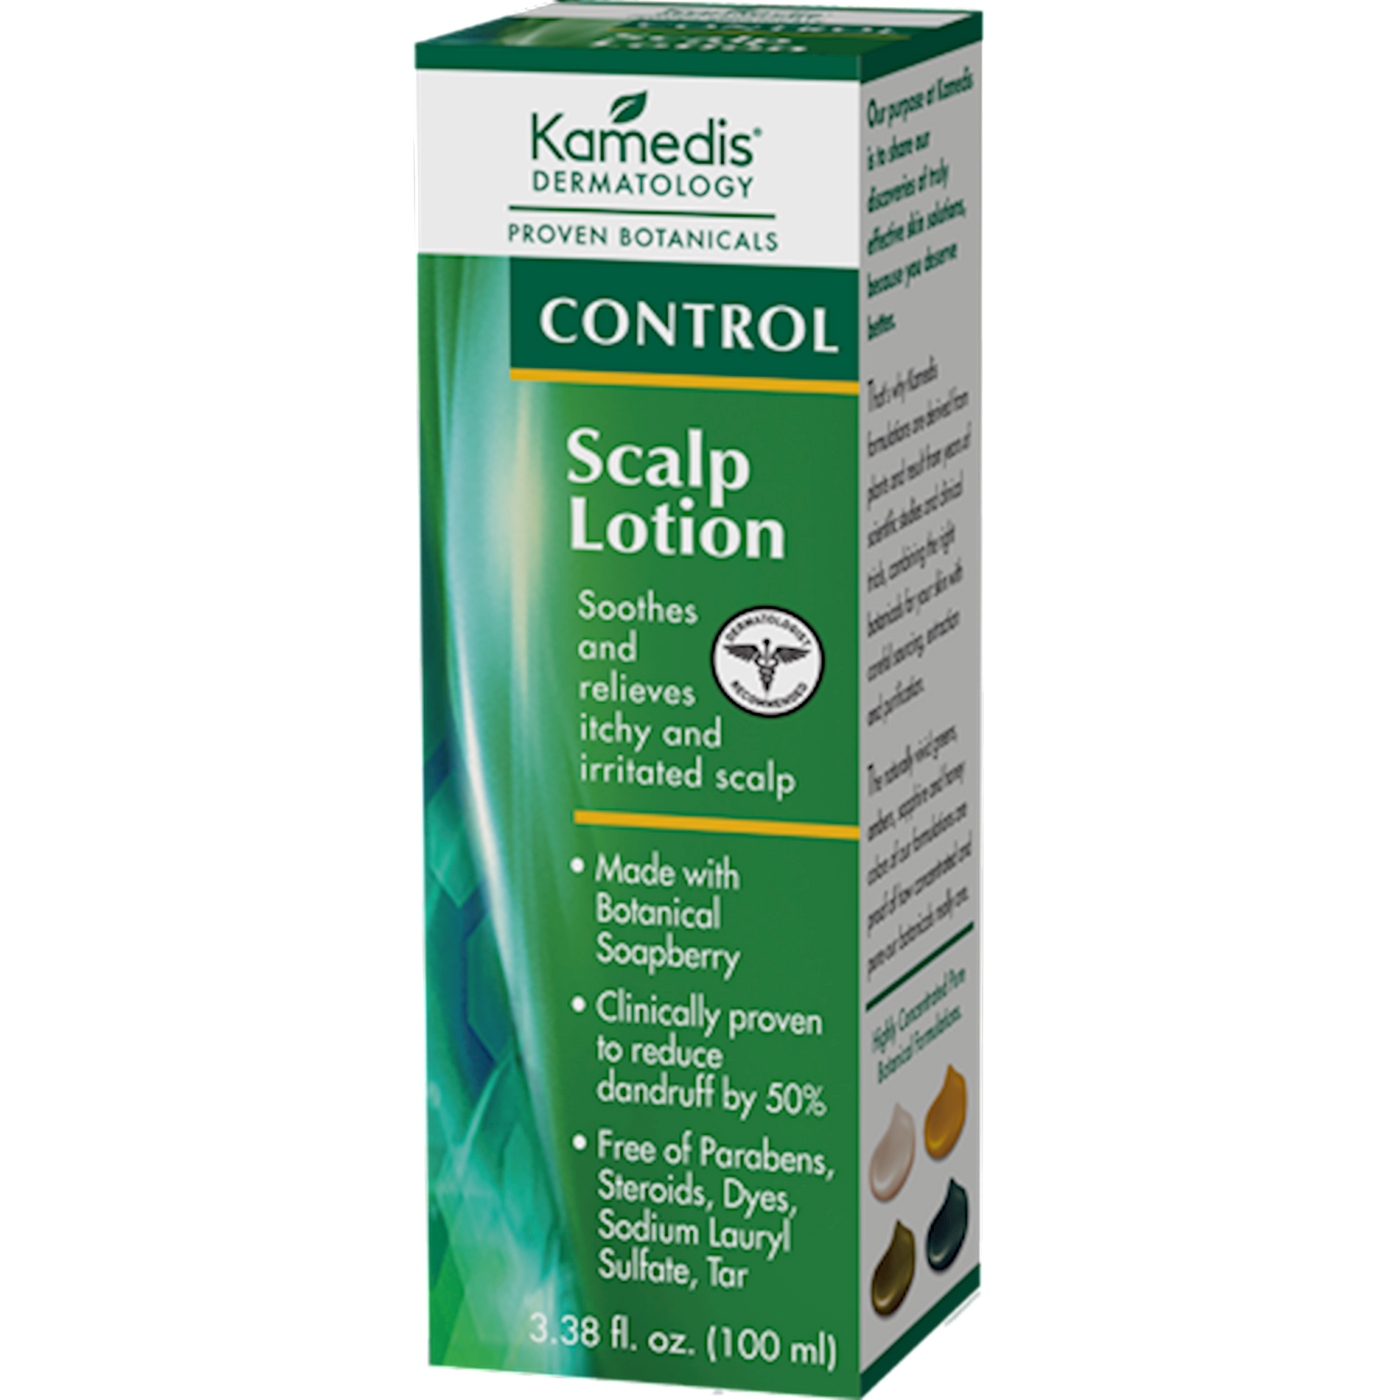 Kamedis CONTROL Scalp Lotion  Curated Wellness